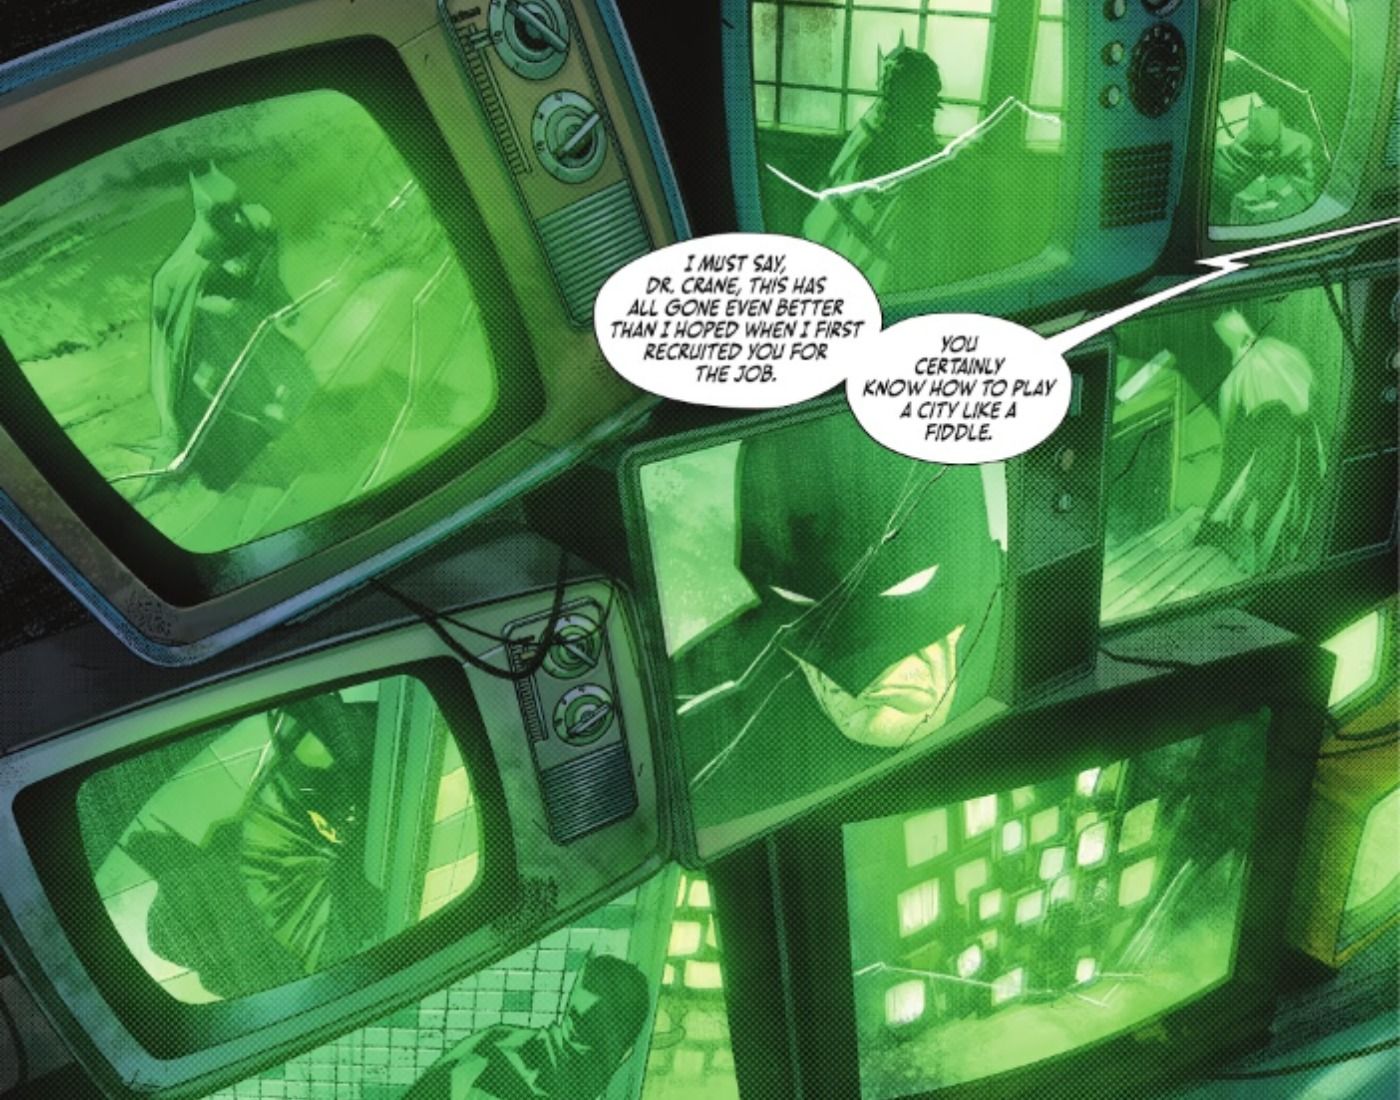 Batman Has One Final Chance At Preventing Future State